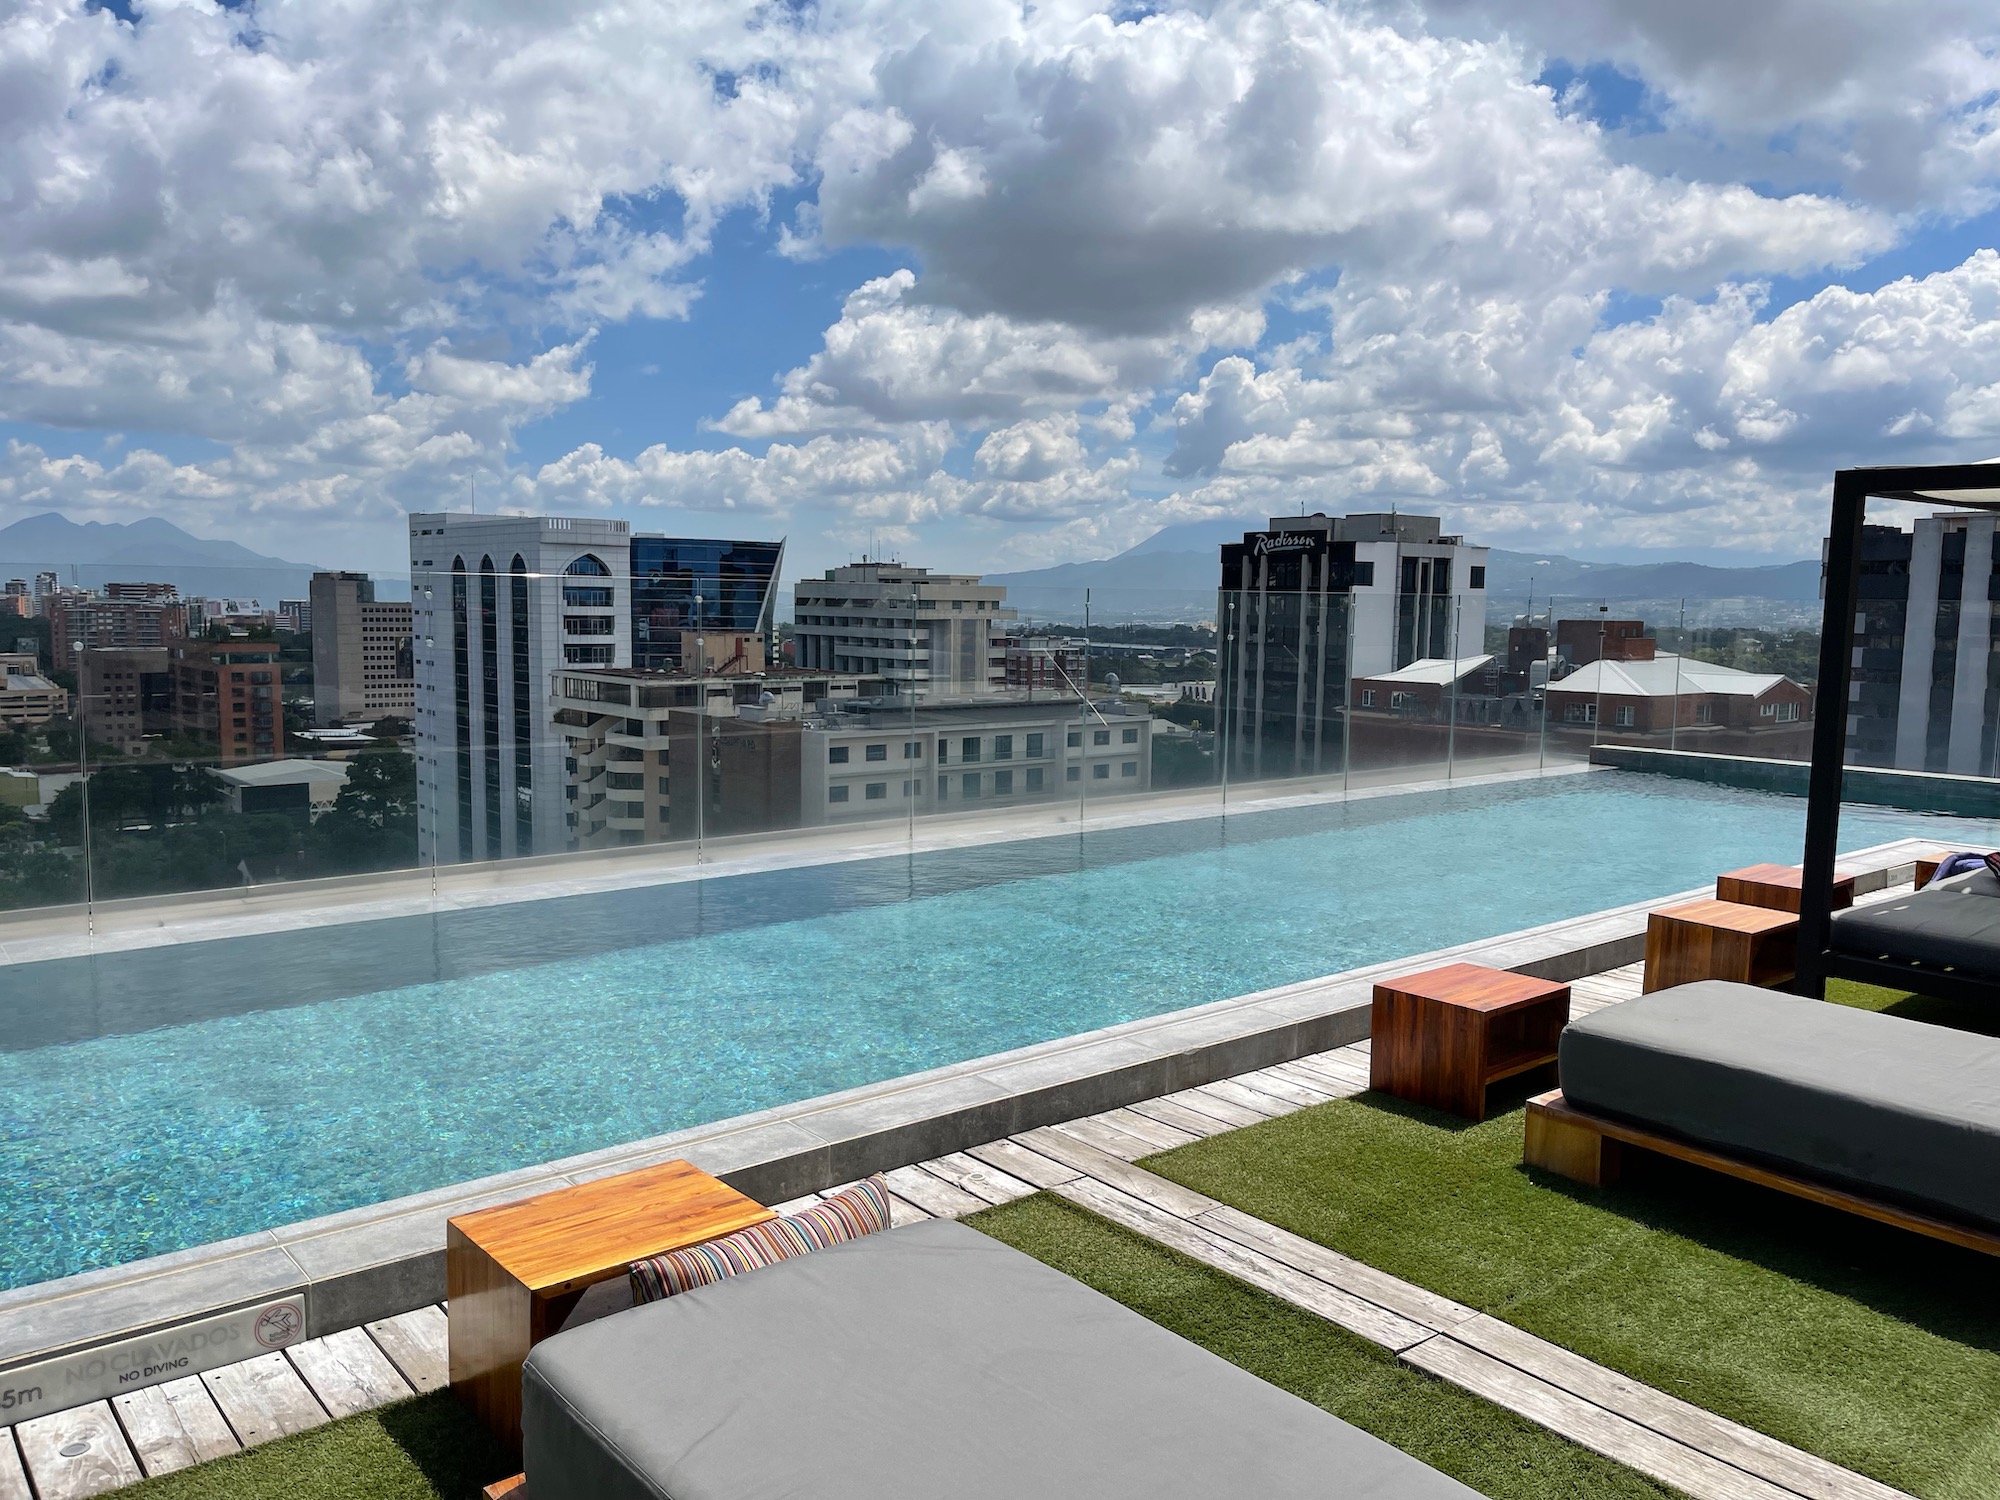 a pool with a view of a city and mountains